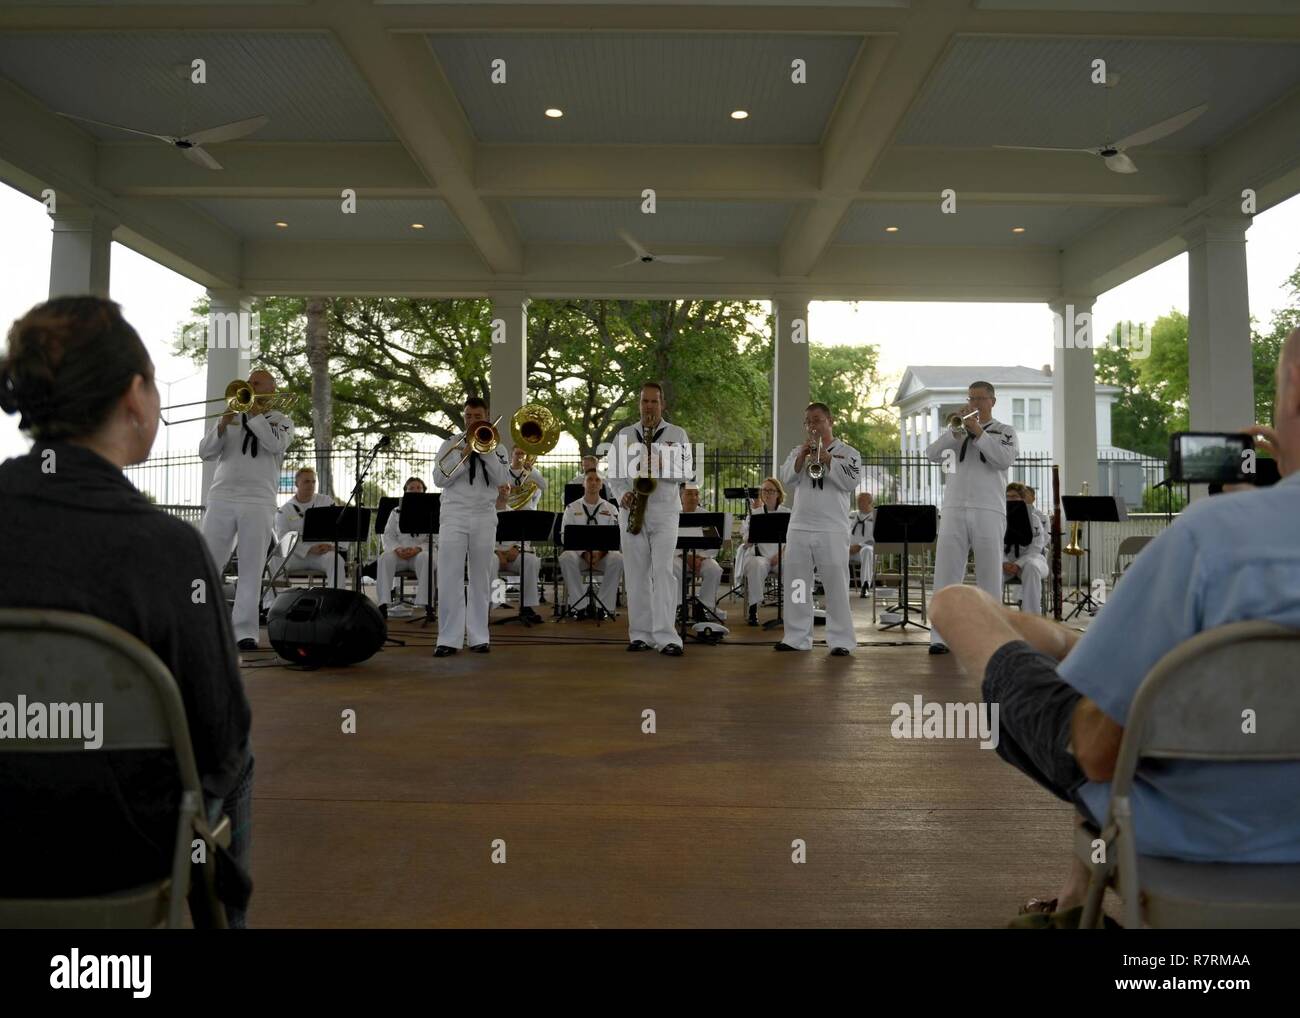 BILOXI, Miss. (April 2, 2017) The Navy Band Southeast Brass Band performs during a Navy Week public concert at Lighthouse Park in Biloxi Miss. Gulfport/Biloxi is one of select regions to host a 2017 Navy Week, a week dedicated to raise U.S. Navy awareness in through local outreach, community service and exhibitions. Stock Photo